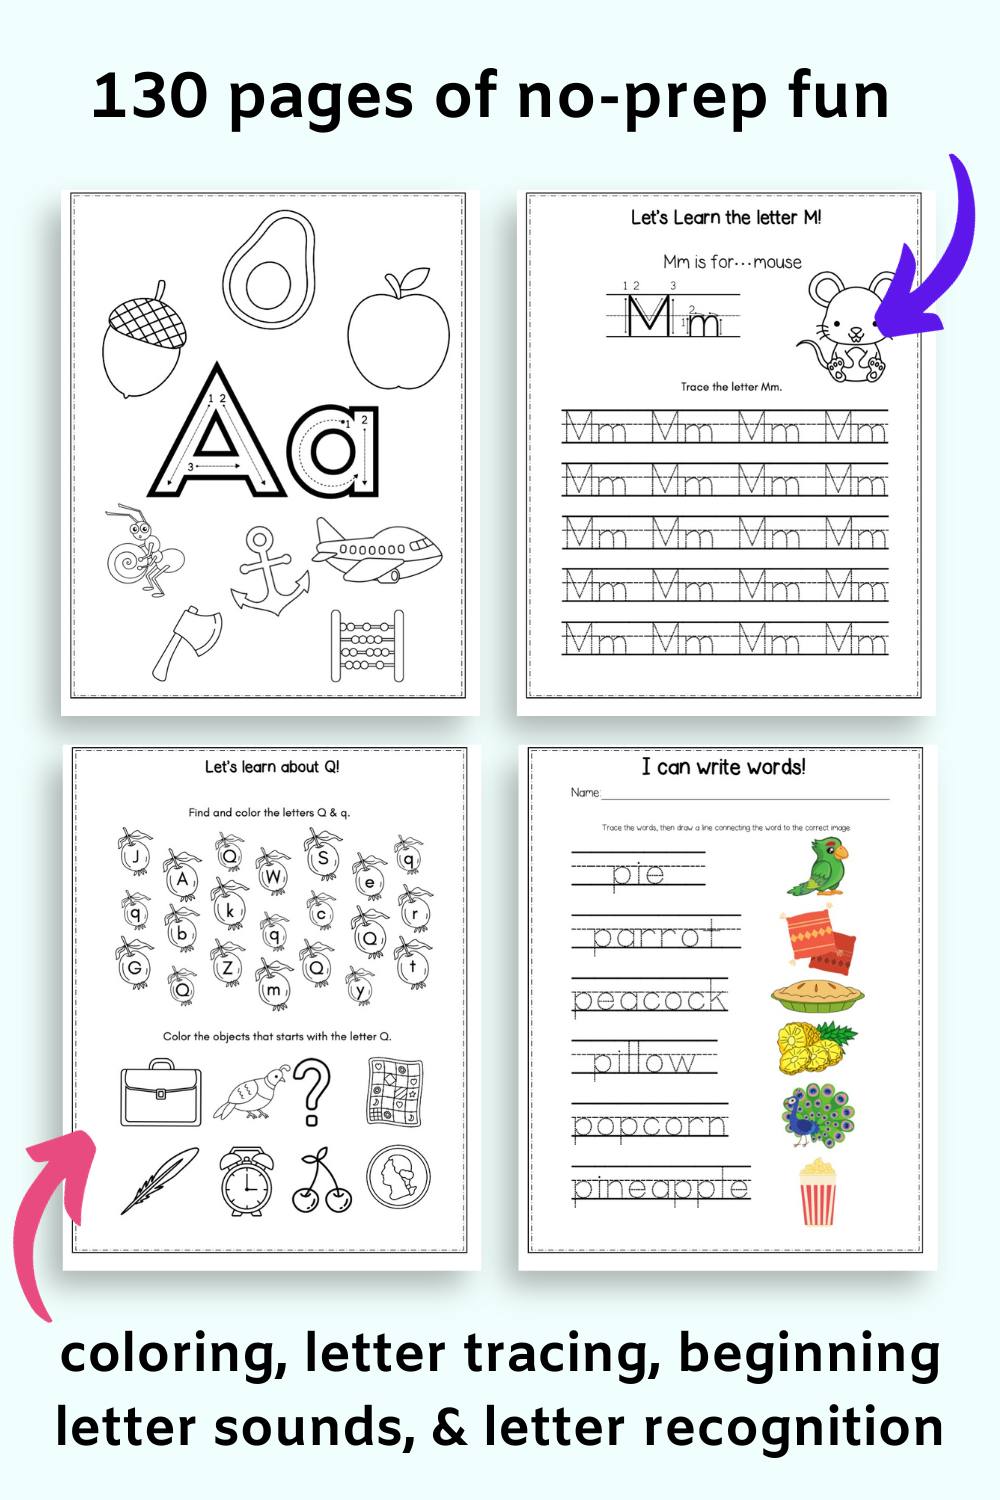 Text "130 pages of no-prep fun" and "coloring, letter tracing, beginning letter sounds, and letter recognition" with a preview of four pages from the workbook. Pages include: letter a coloring, letter m tracing, letter q find, and p letter word tracing